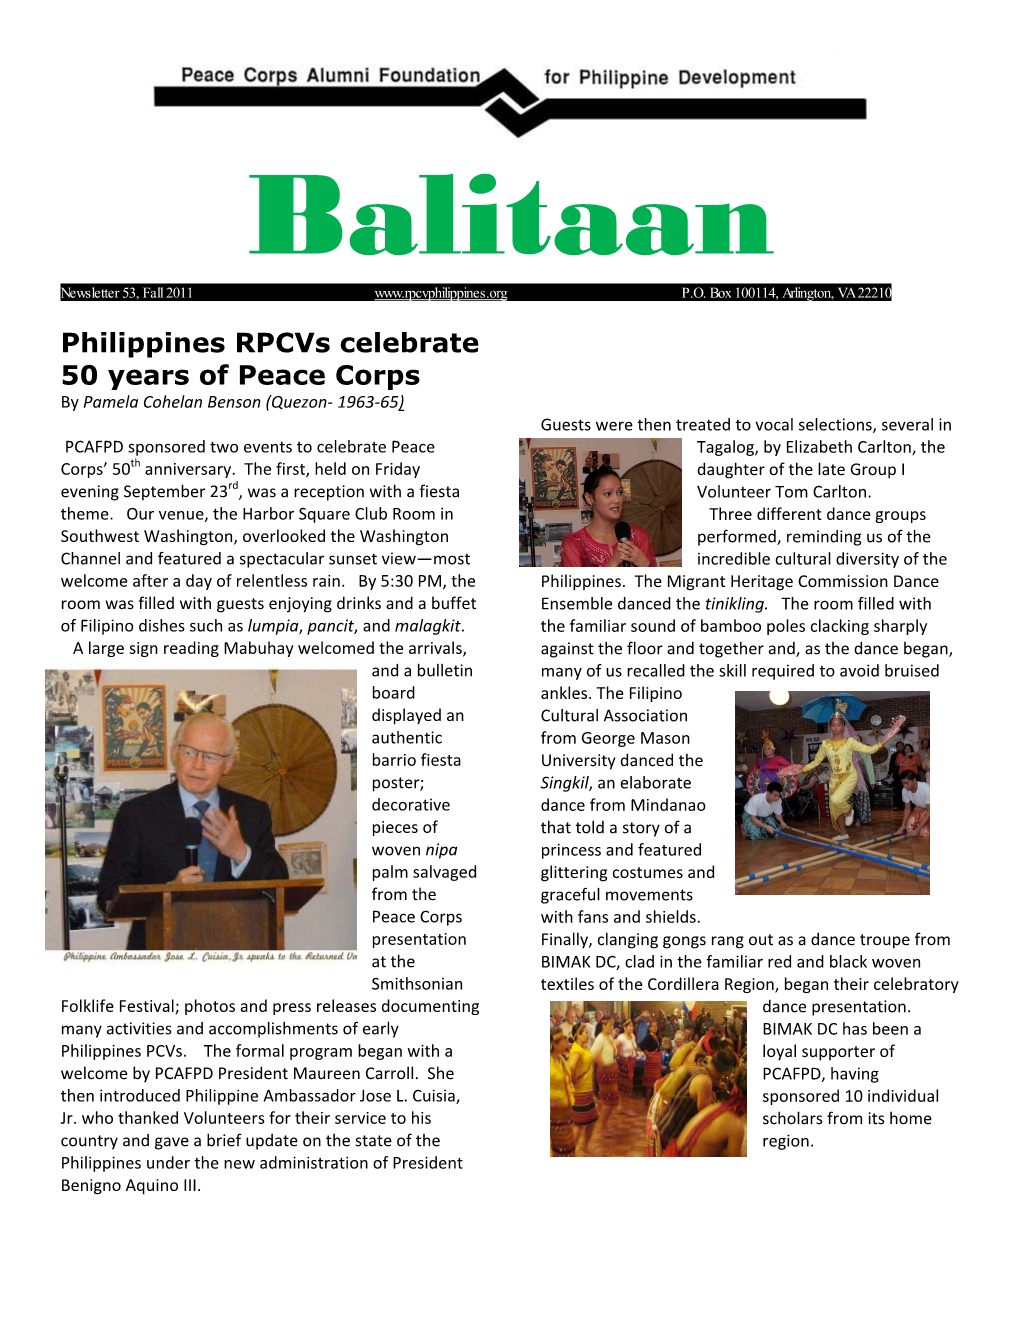 Philippines Rpcvs Celebrate 50 Years of Peace Corps